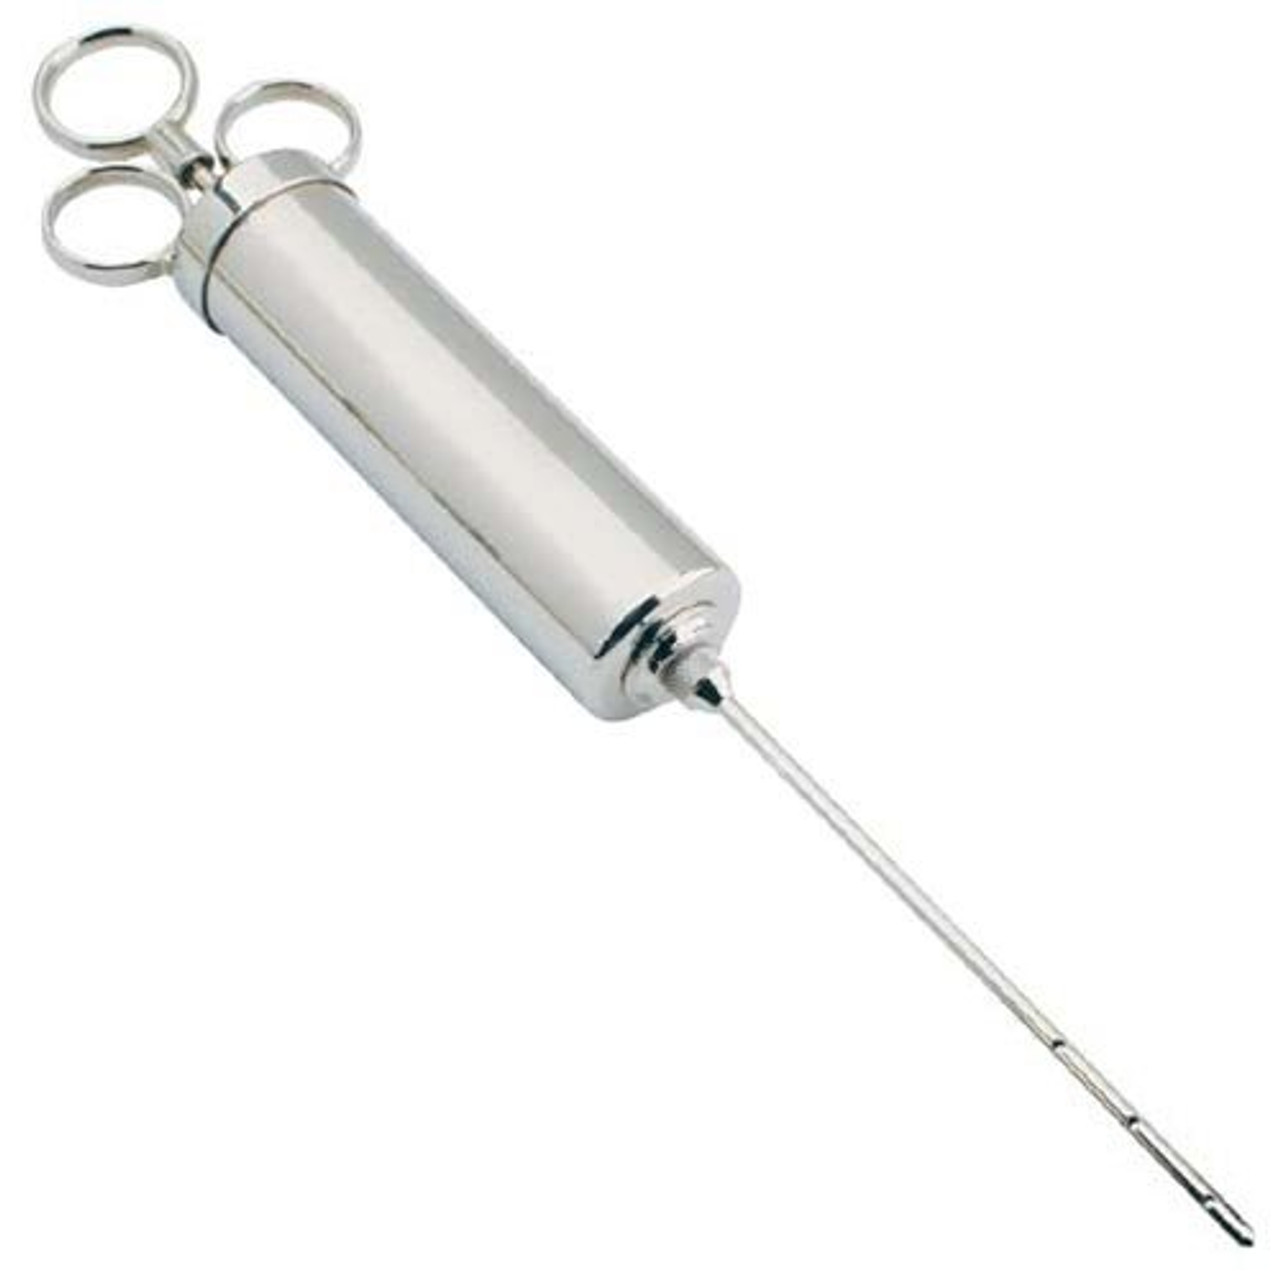 Stainless Steel Professional Meat Meat Grinder Machine Needle